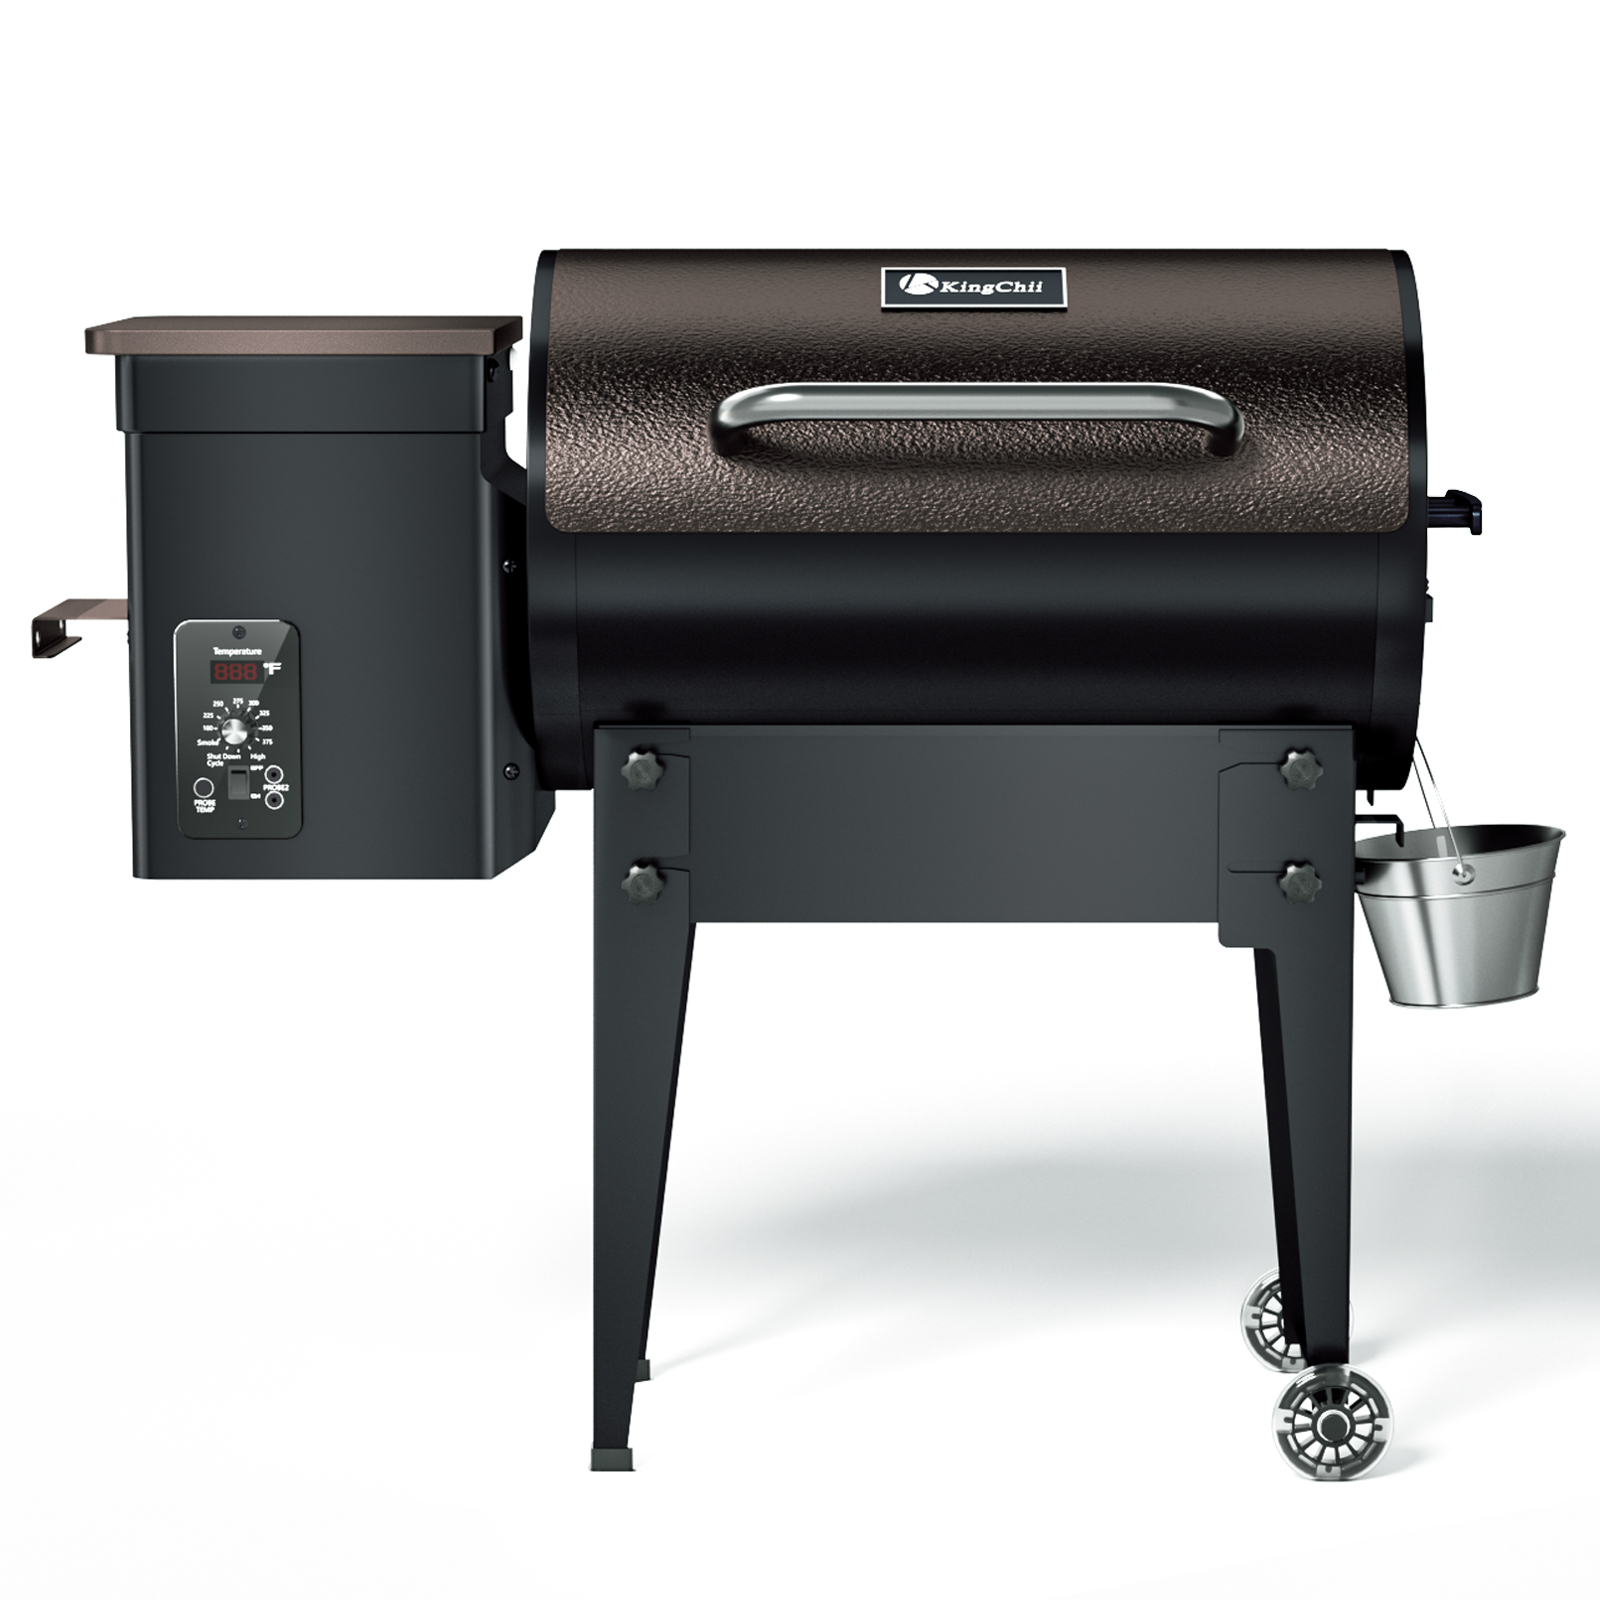 KingChii 456 sq. in Wood Pellet Smoker & Grill BBQ with Auto Temperature Controls, Folding Legs for Outdoor Patio RV, Bronze - image 1 of 10